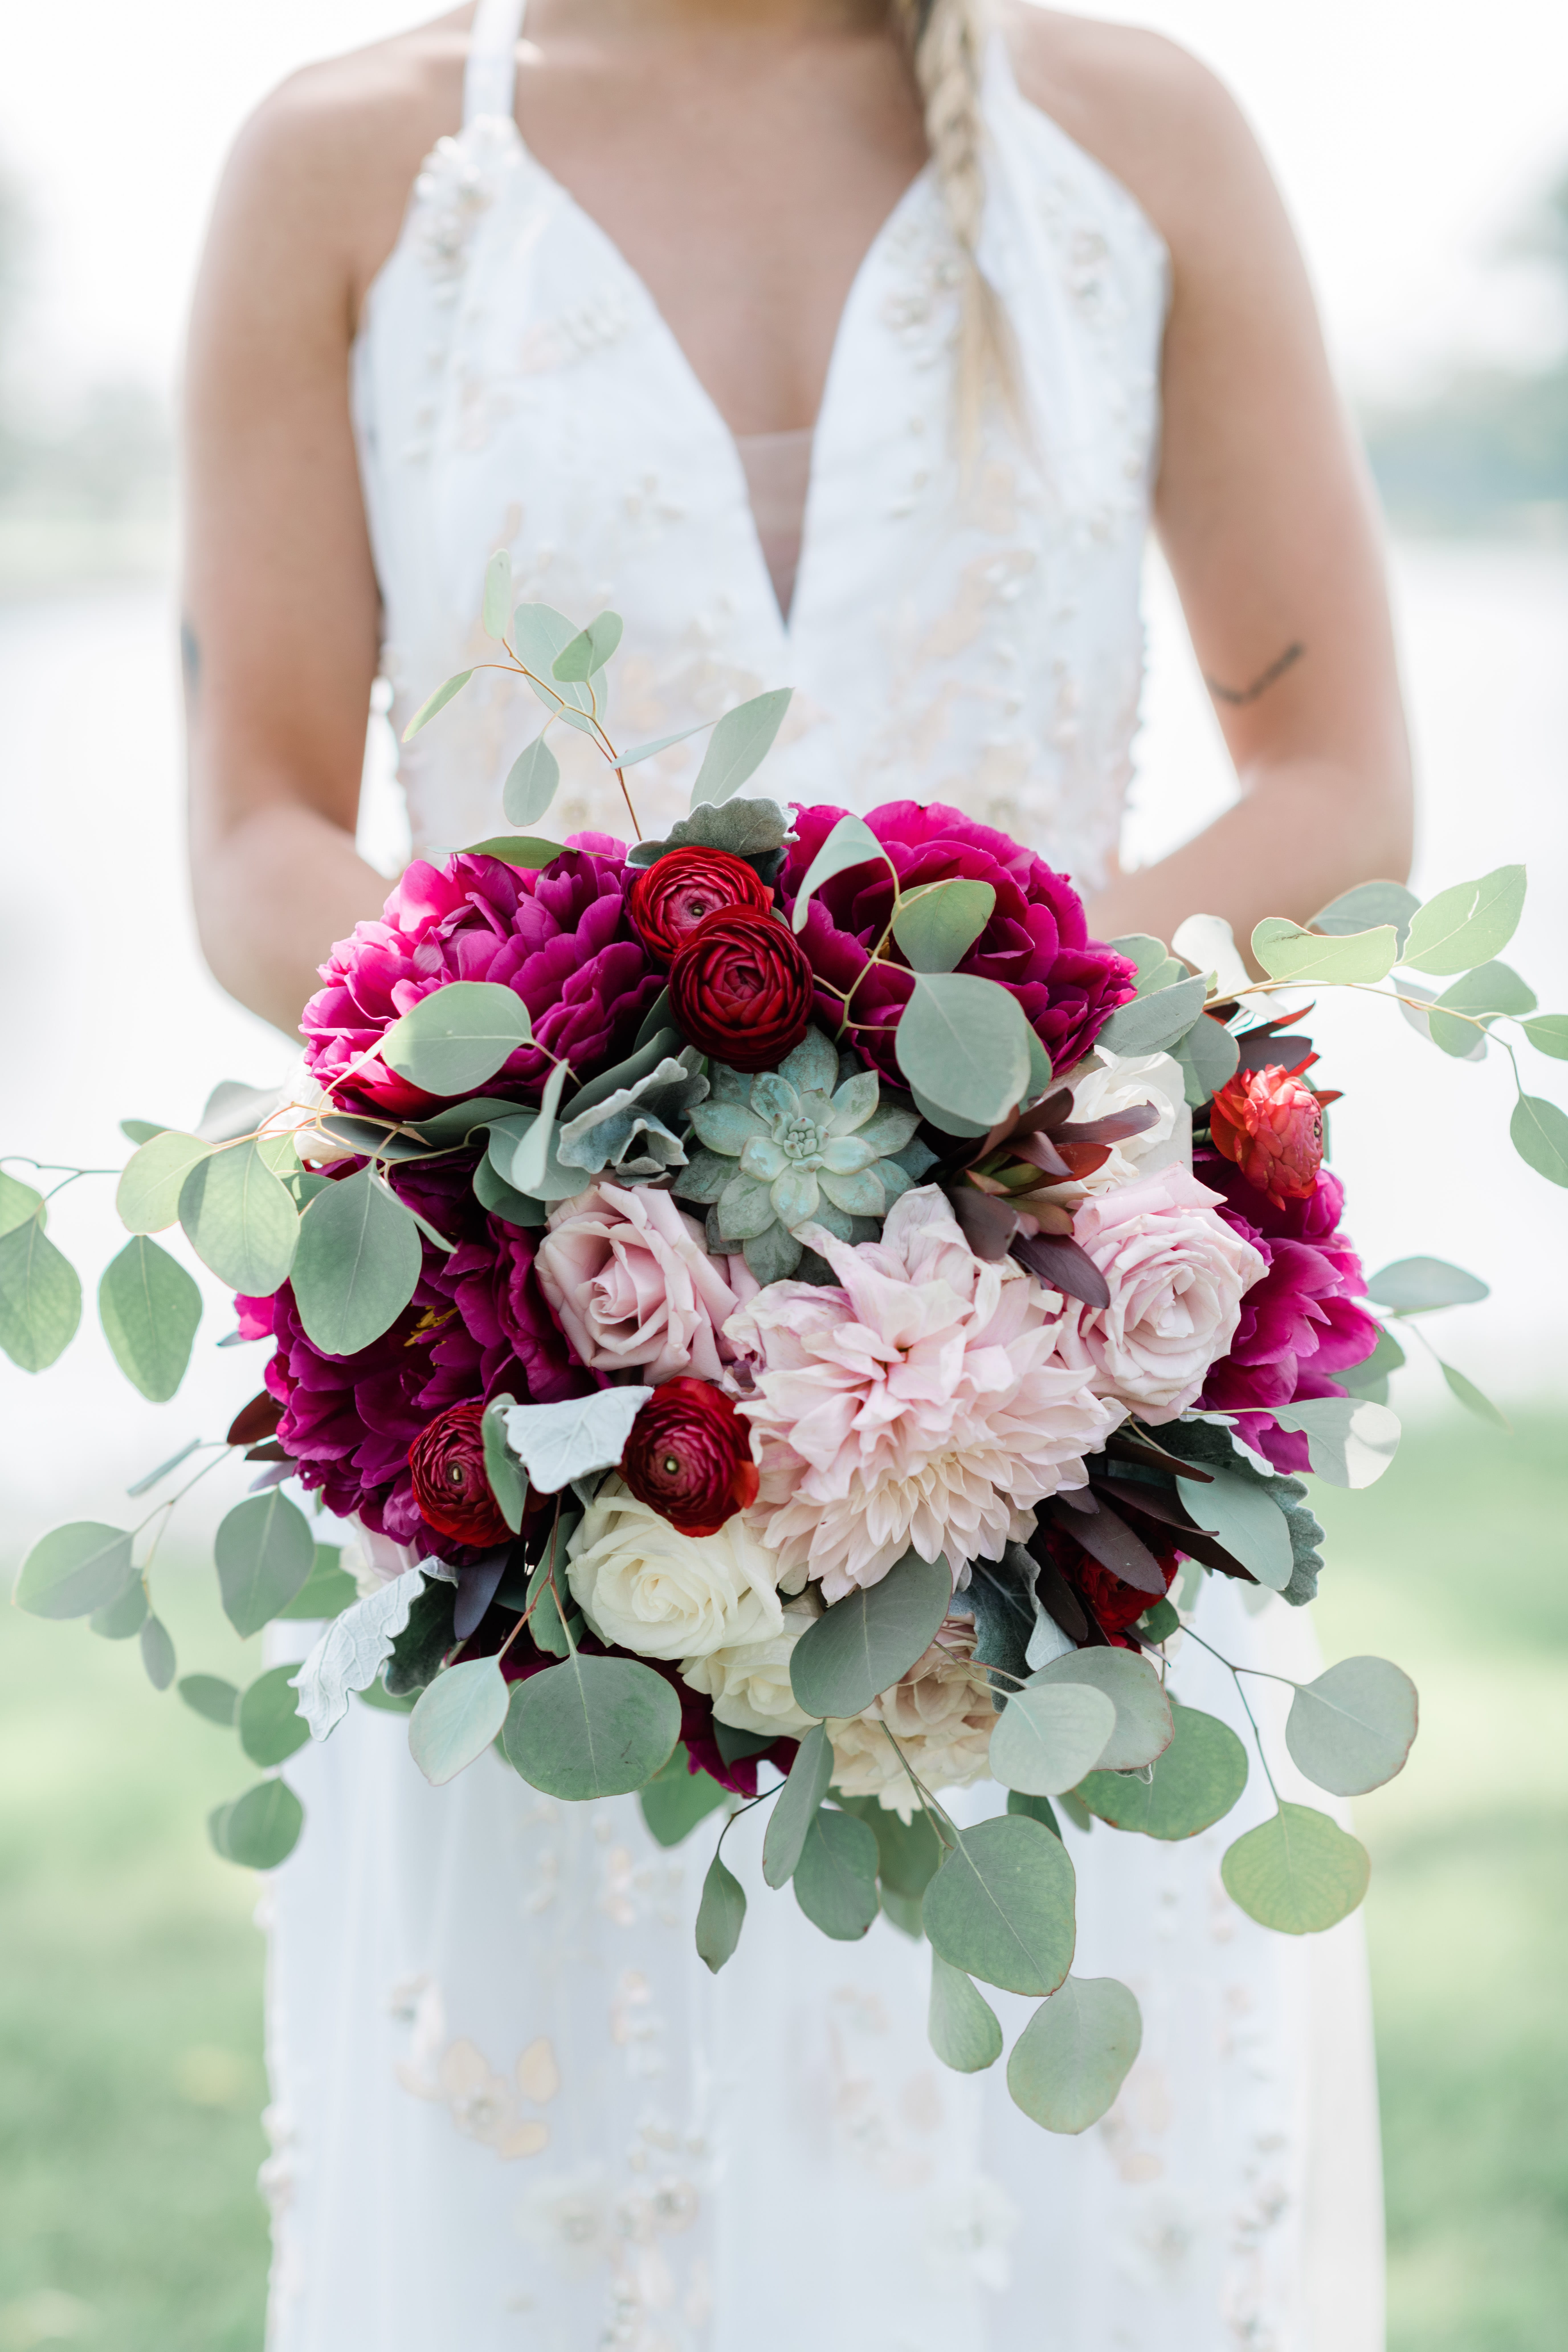 Bridal bouquet made with red, pink, purple and white flowers with greenery